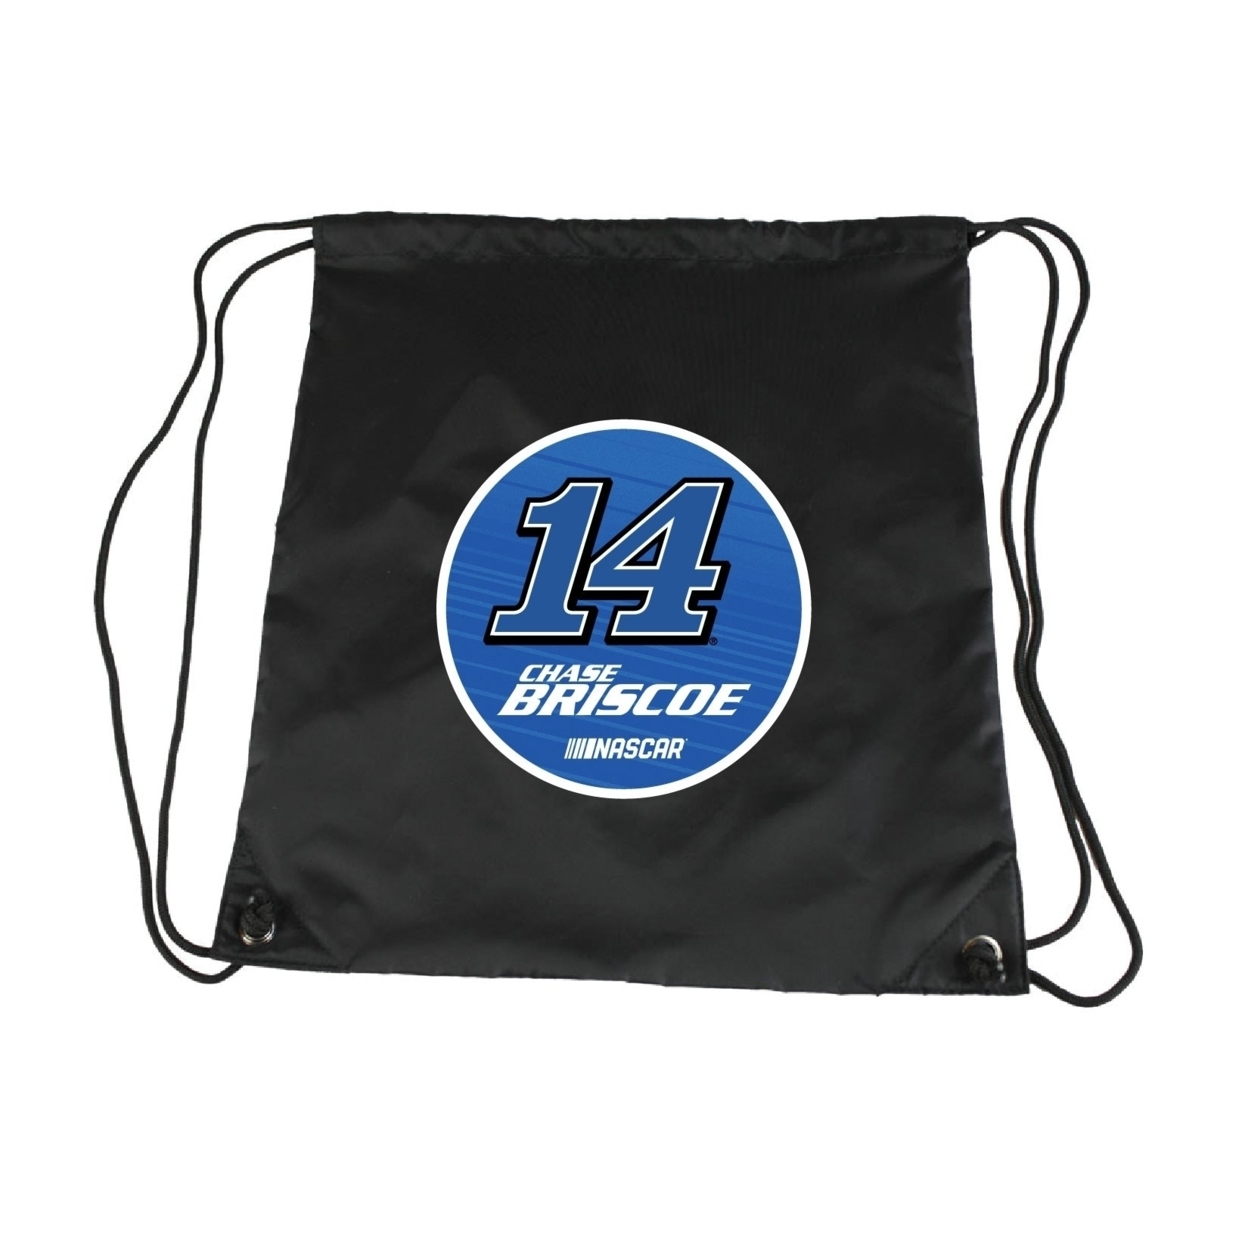 Chase Briscoe # 14 Nascar Cinch Bag With Drawstring New For 2021